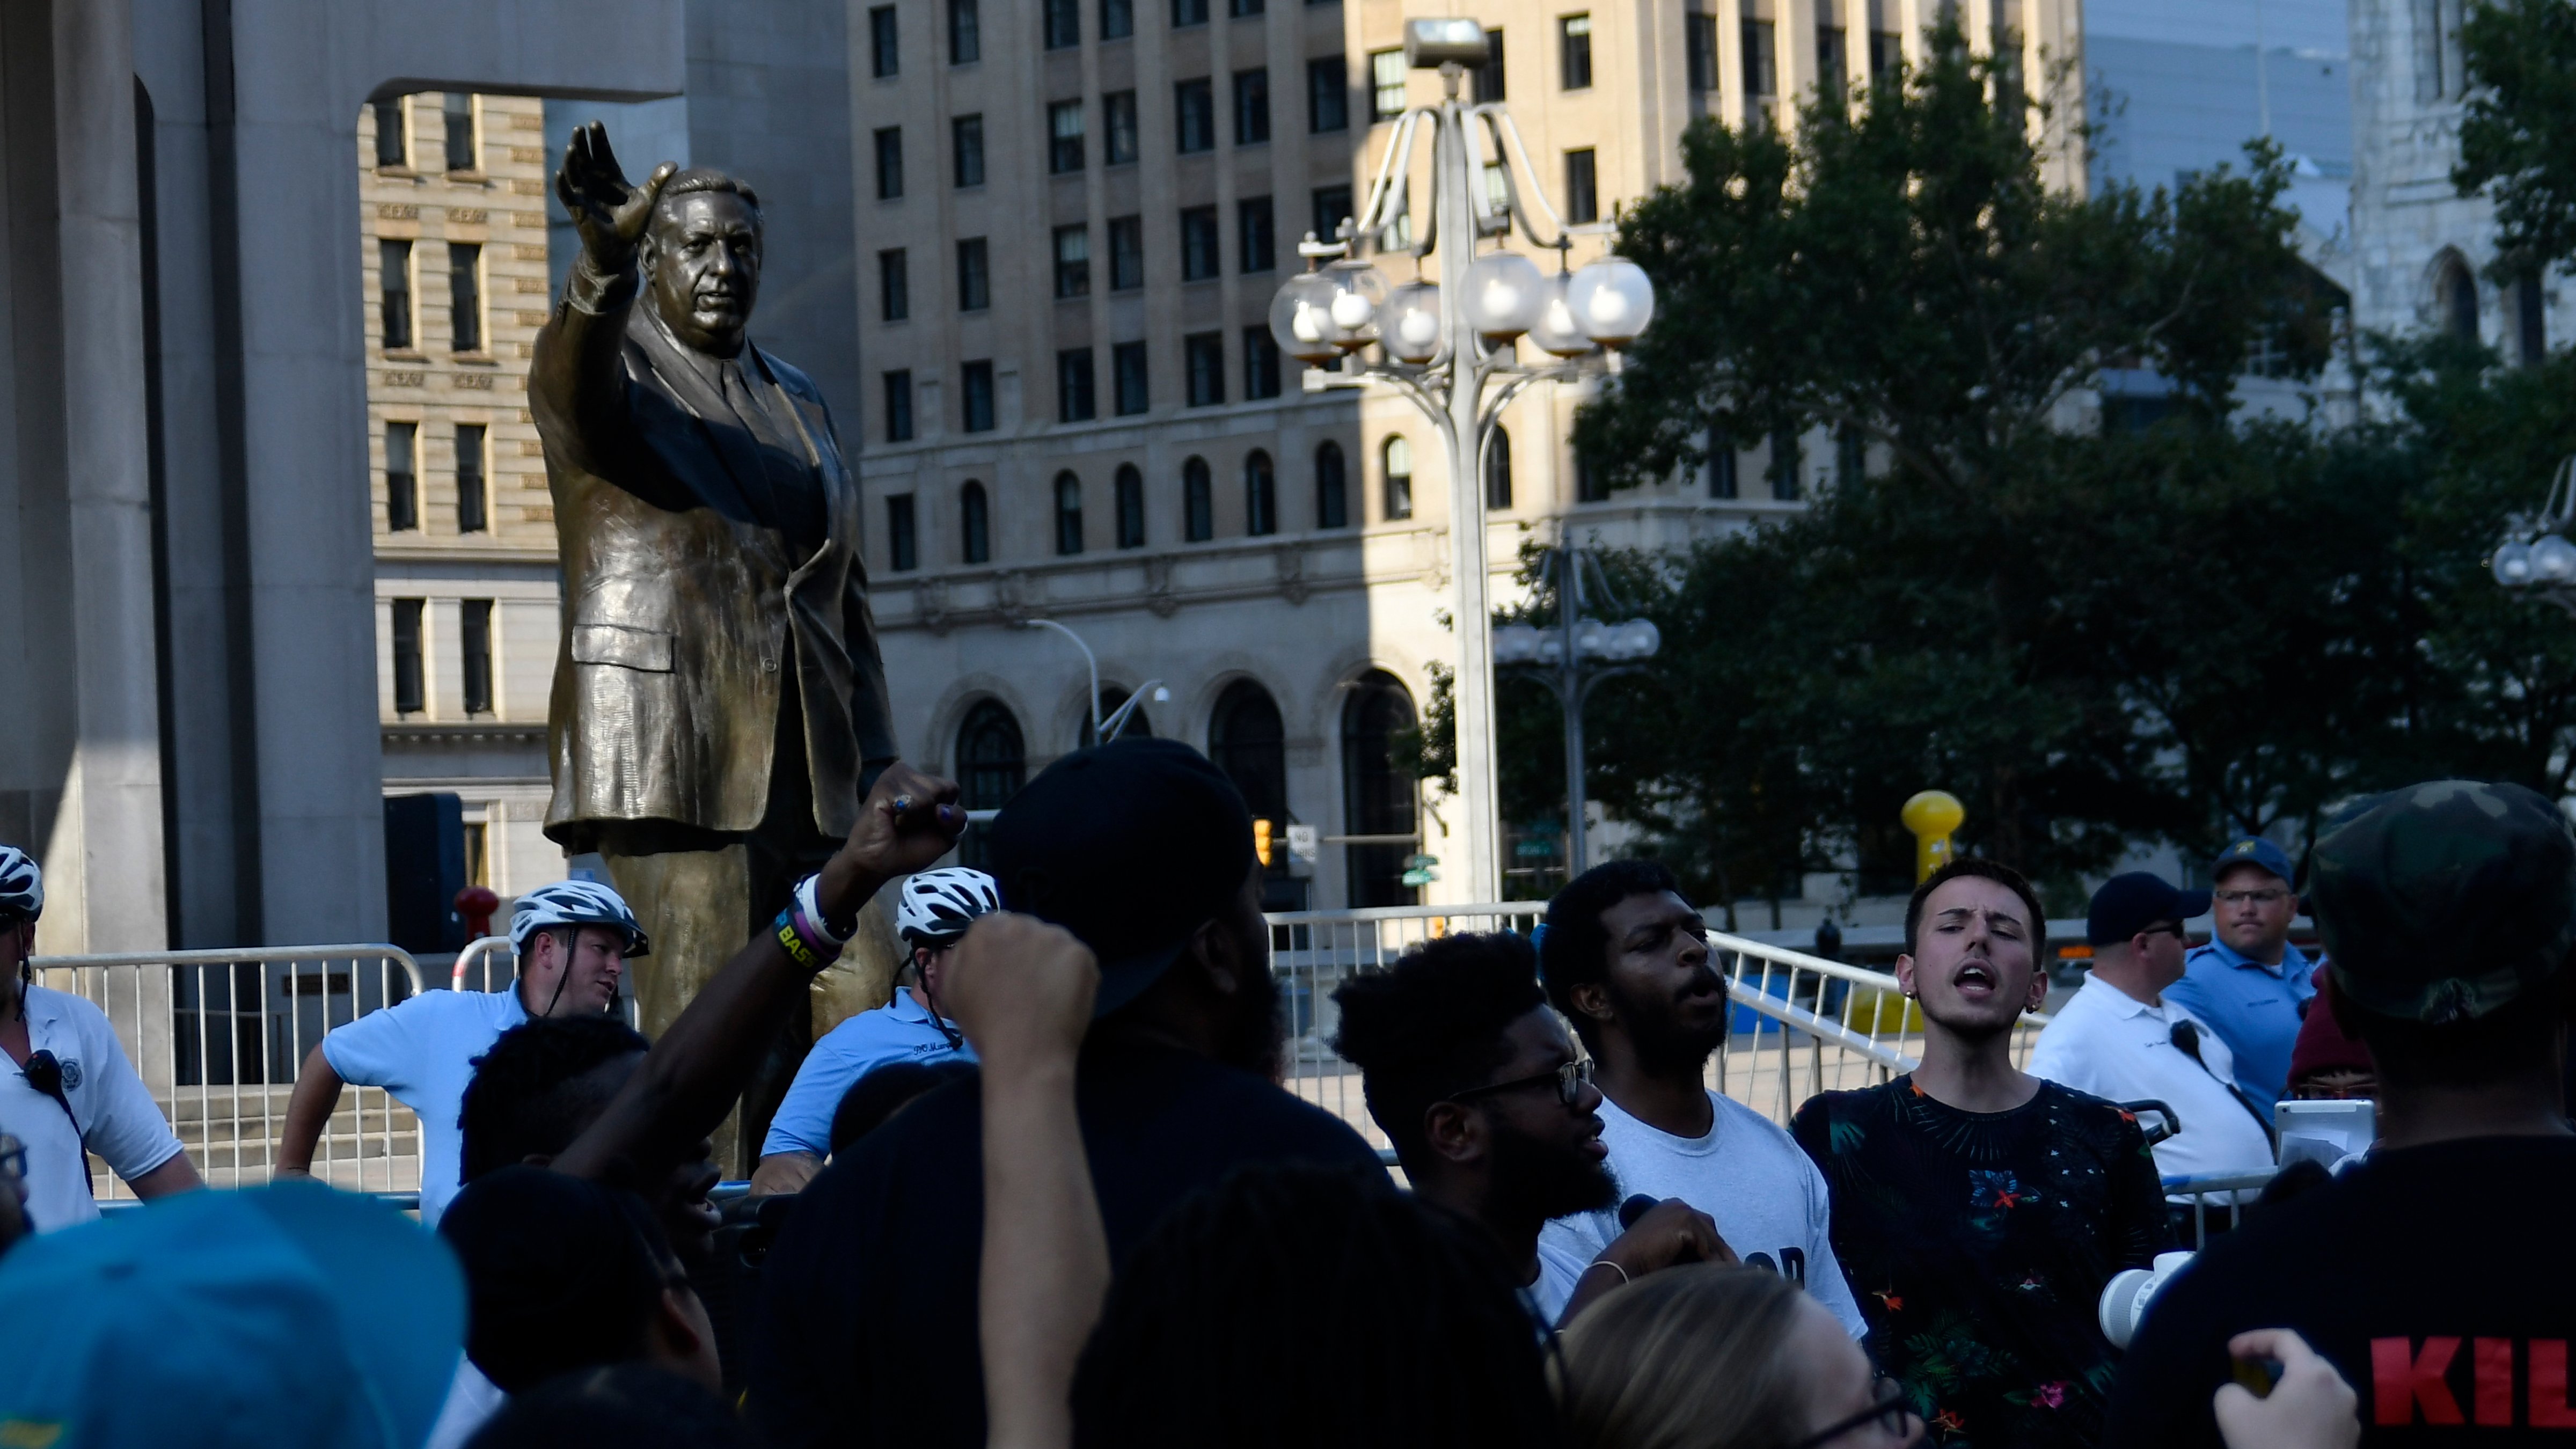 Protestors demand the removal of the Frank Rizzo statue, at a rally near City Hall, in Philadelphia, PA, on August 21, 2017. (Photograph by Bastiaan Slabbers—NurPhoto/Getty)